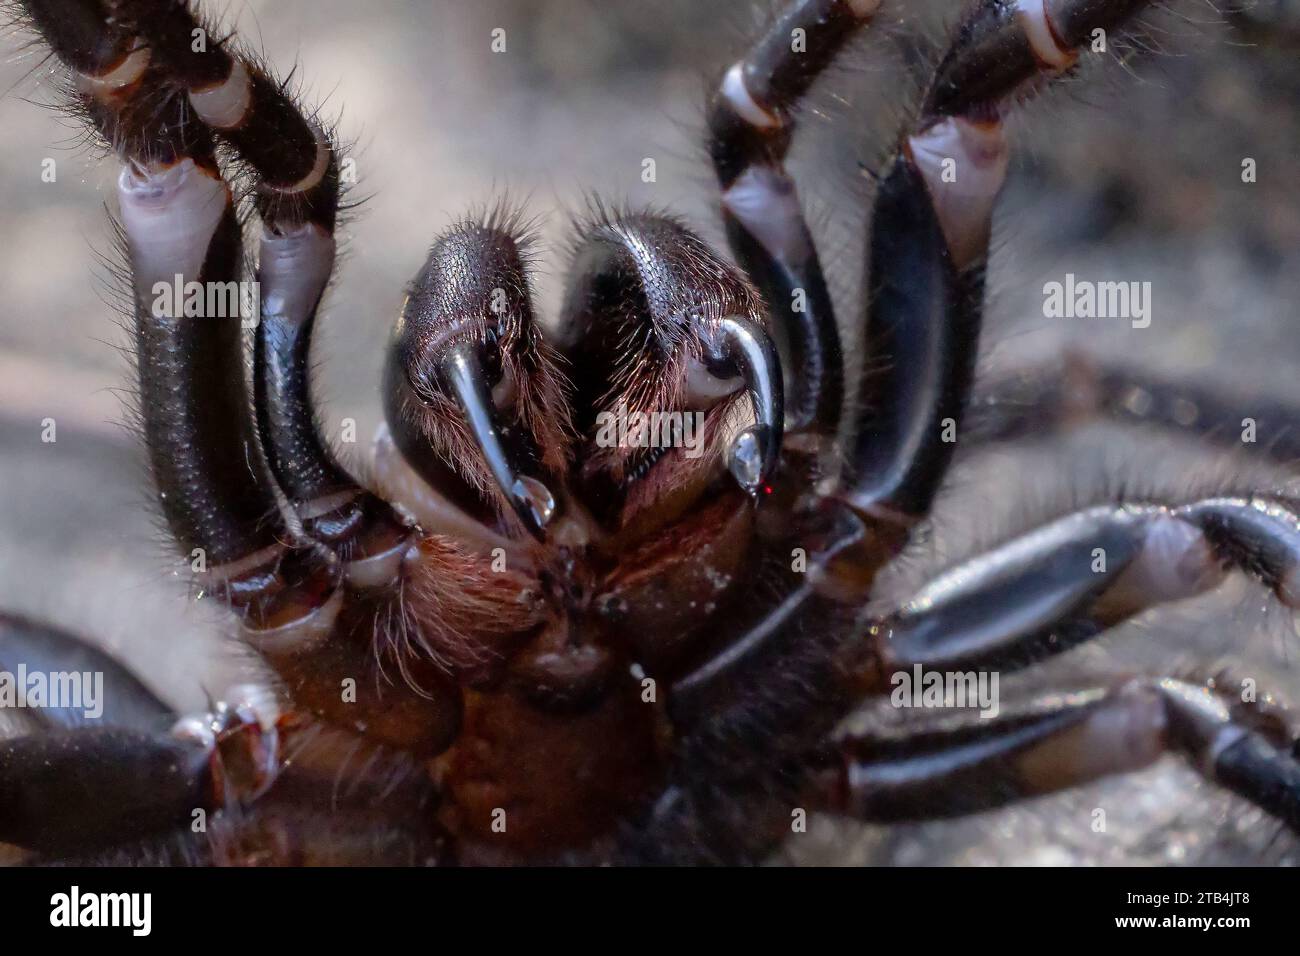 Defensive Female Sydney Funnel Web Spider with venom droplets on fangs Stock Photo